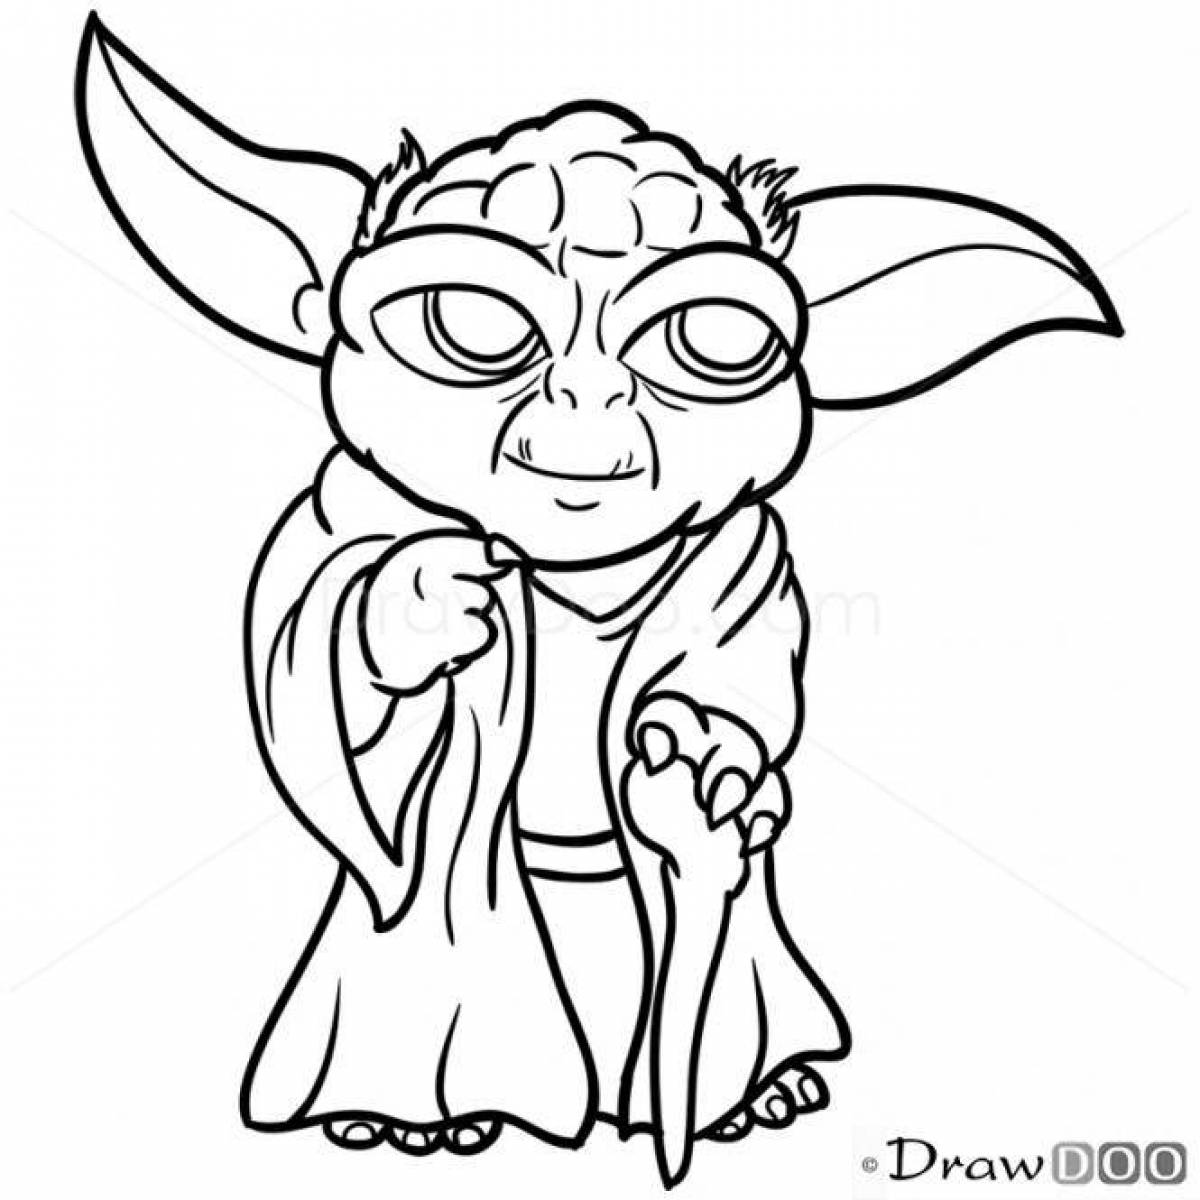 Master Yoda's richly colored coloring page